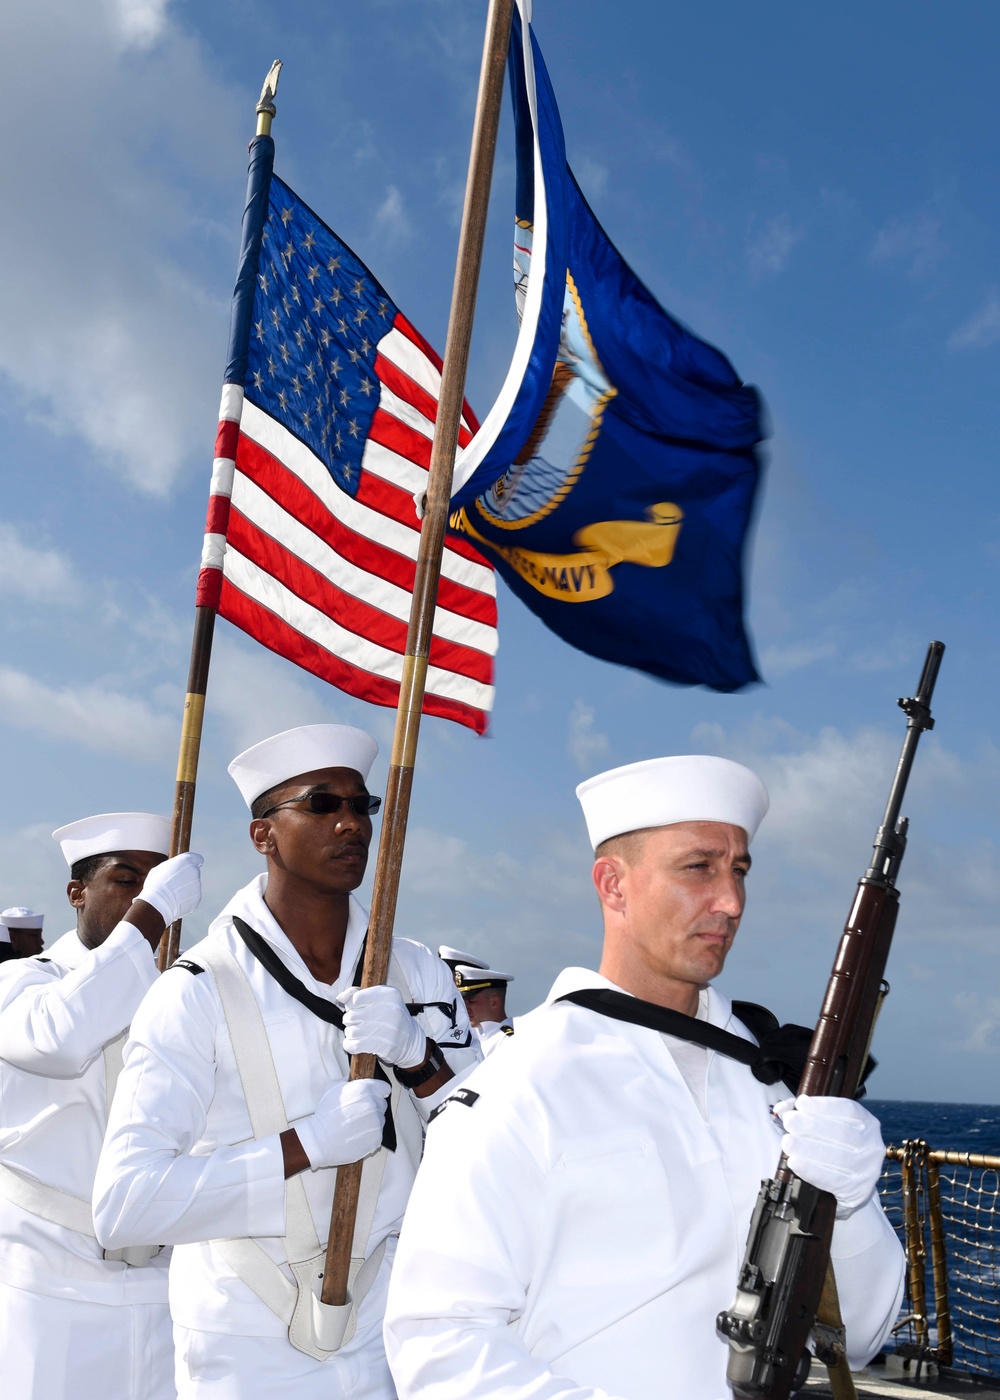 DVIDS - Images - USS Pinckney conducts a Burial at Sea during RIMPAC 16 ...